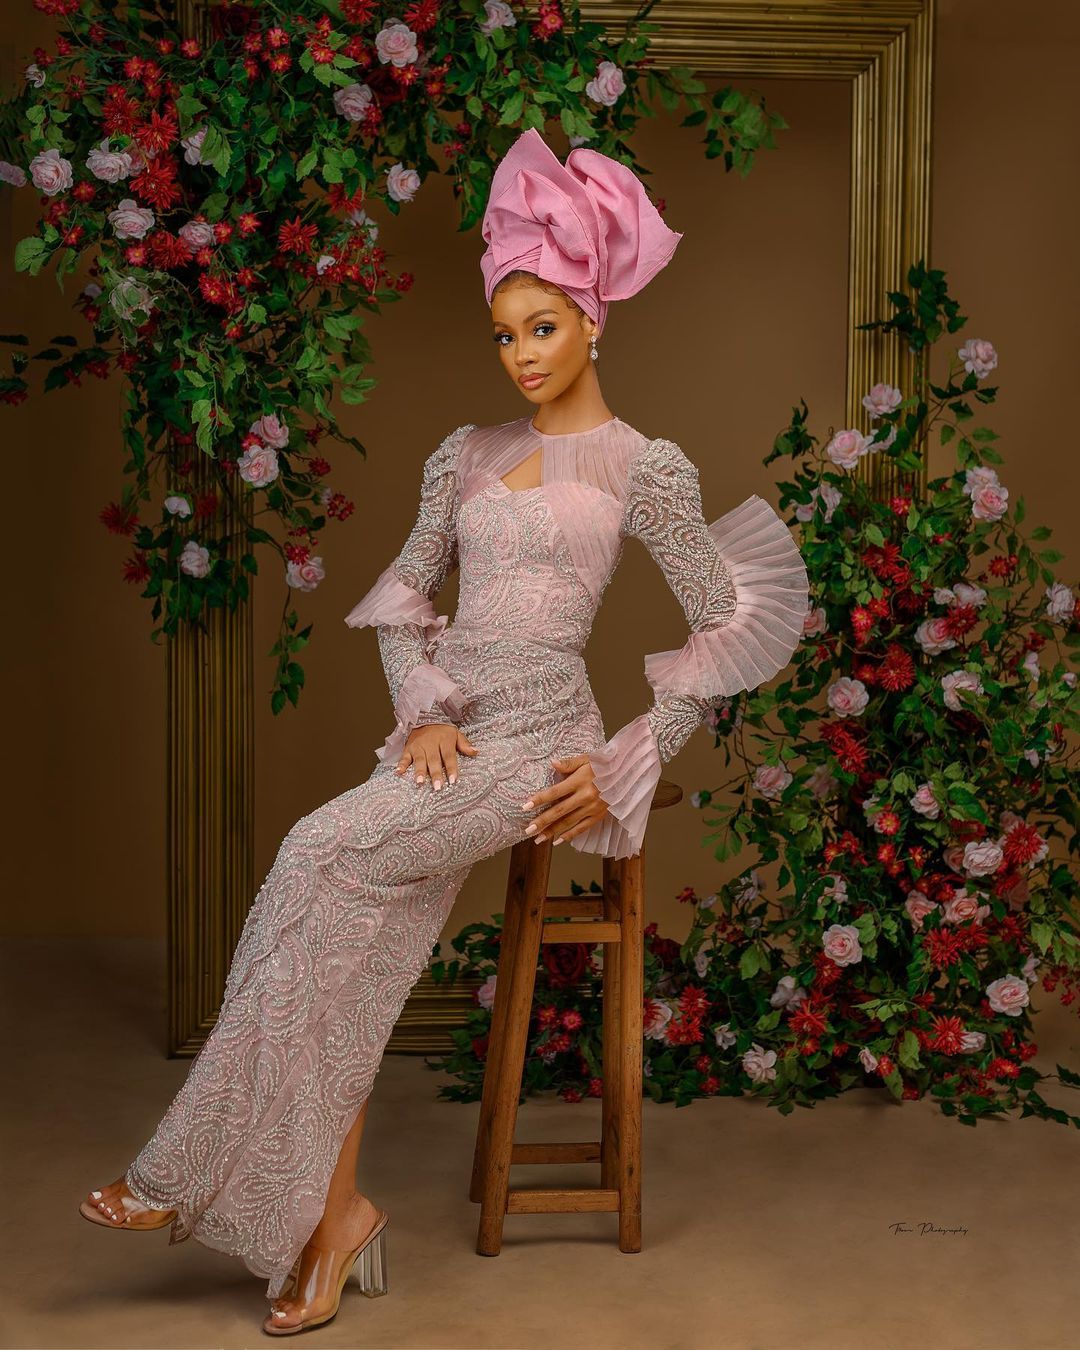 Look Fairly in Pink on Your Yoruba Trad With This Bridal Inspo!